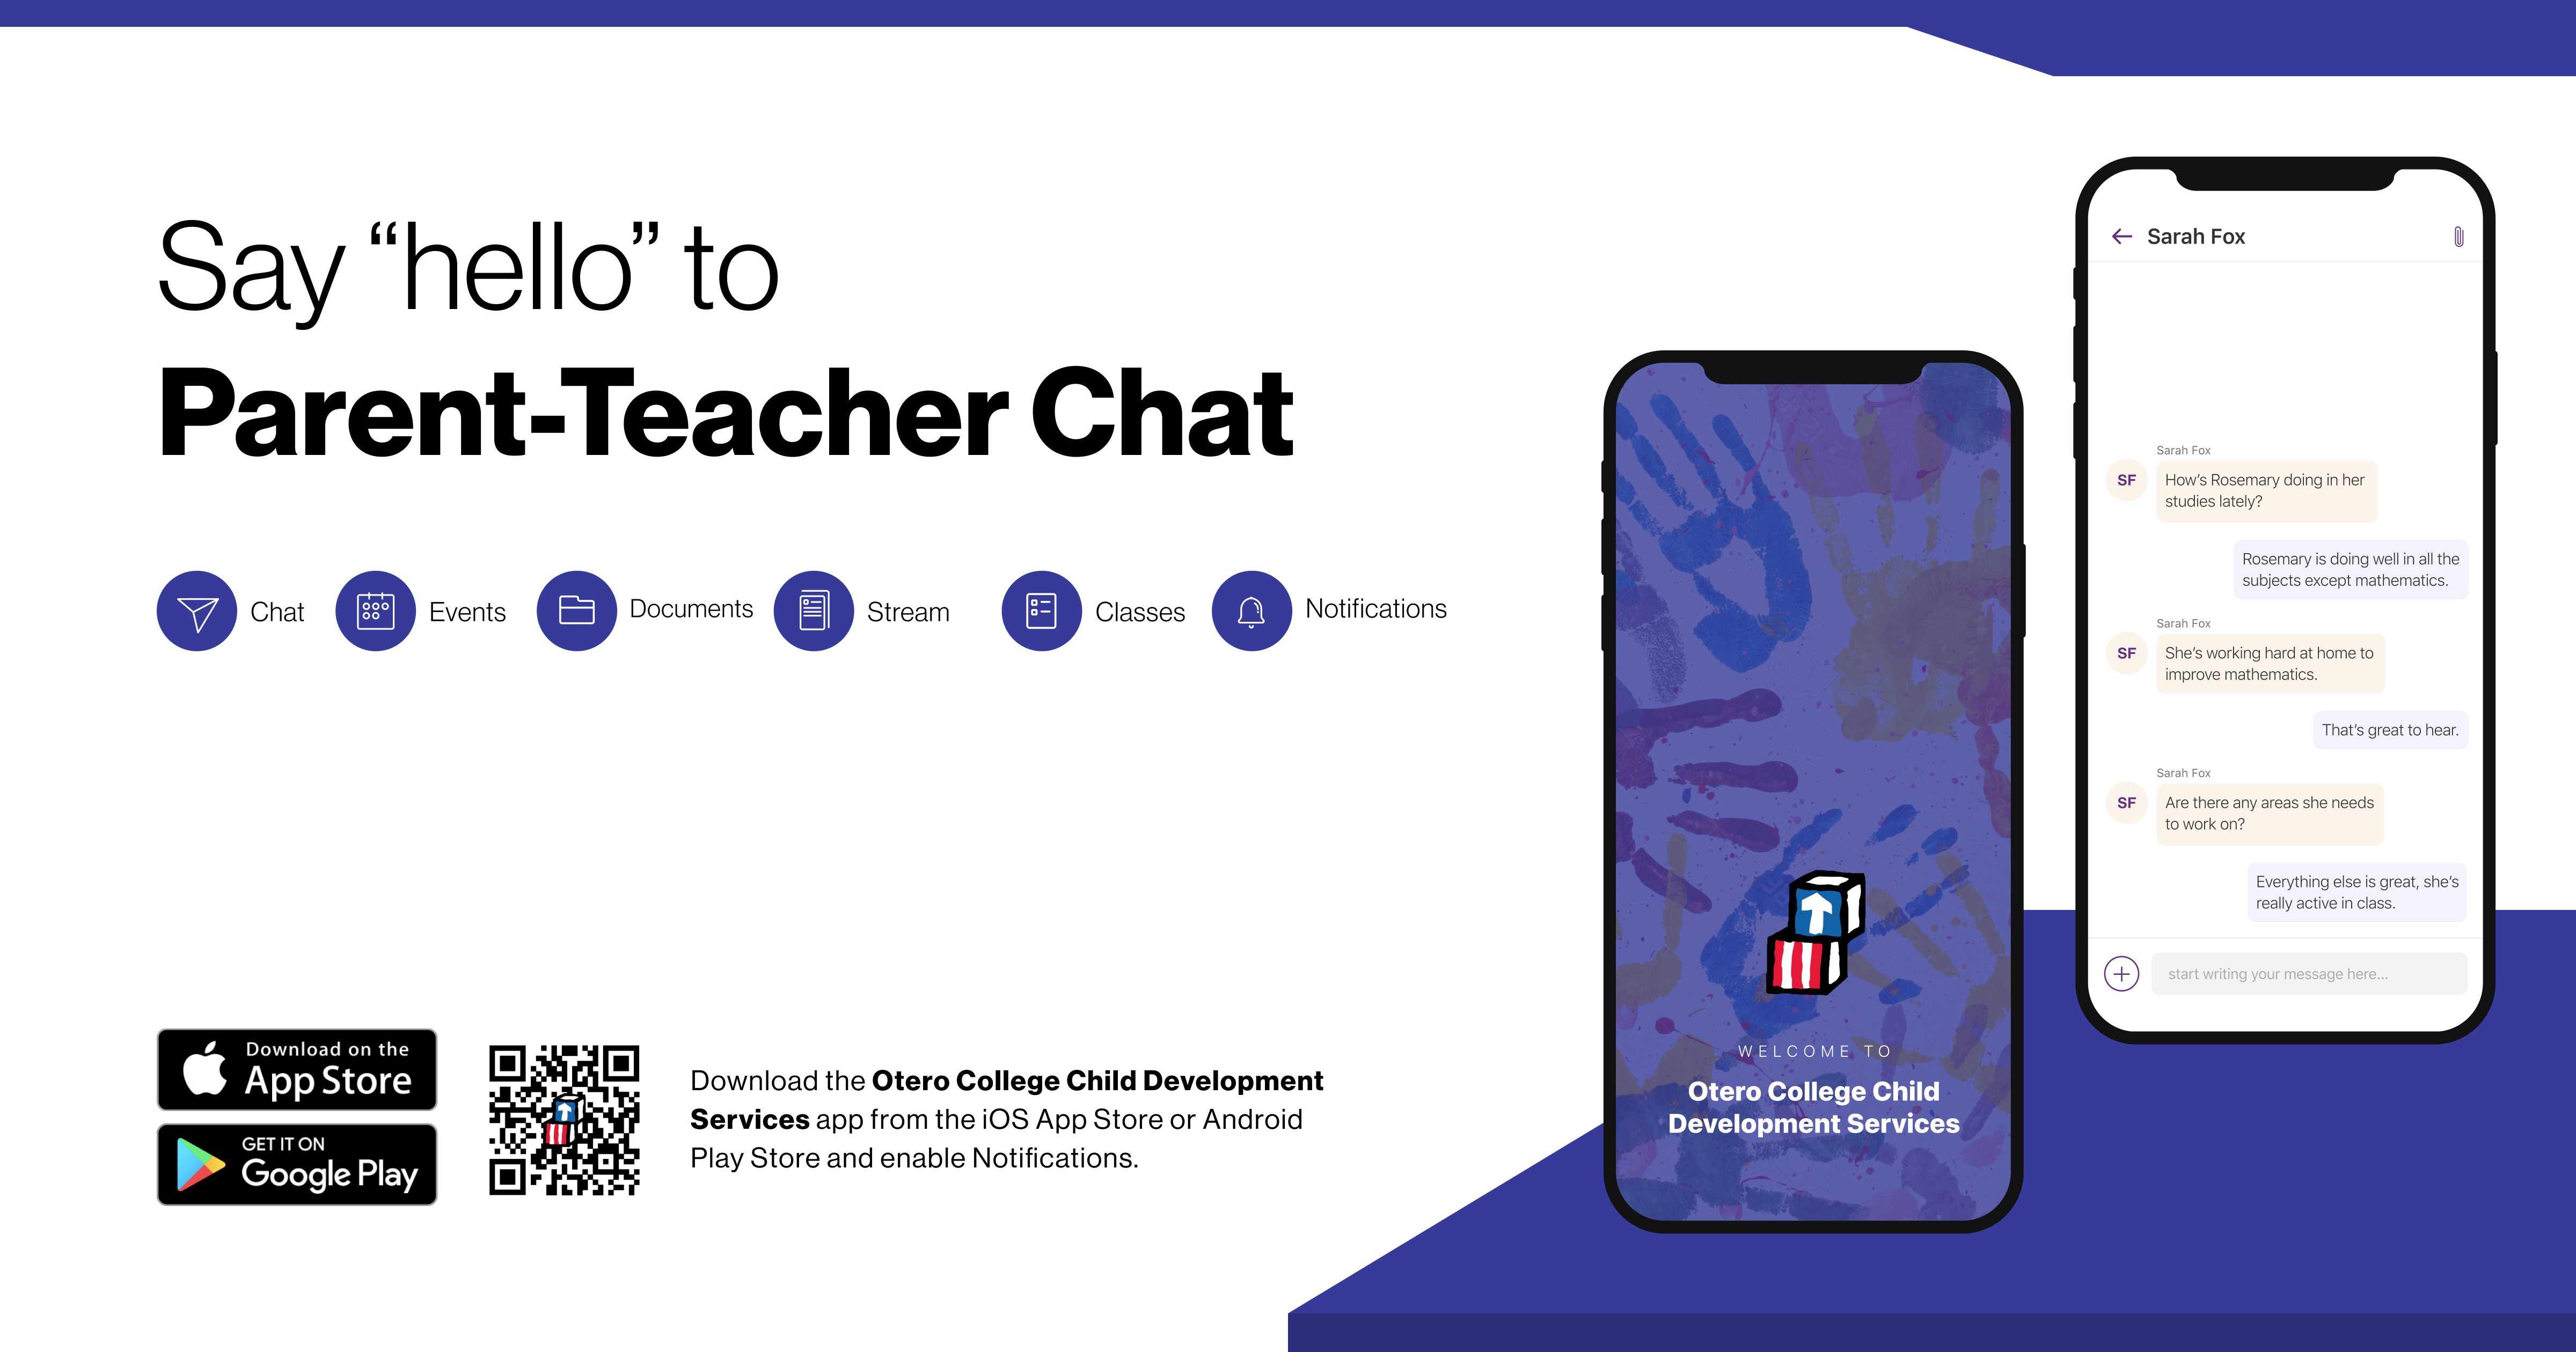 “Say hello to Parent-Teacher chat in the new Rooms app. Download the (school name) app in the Google Play or Apple App store.”